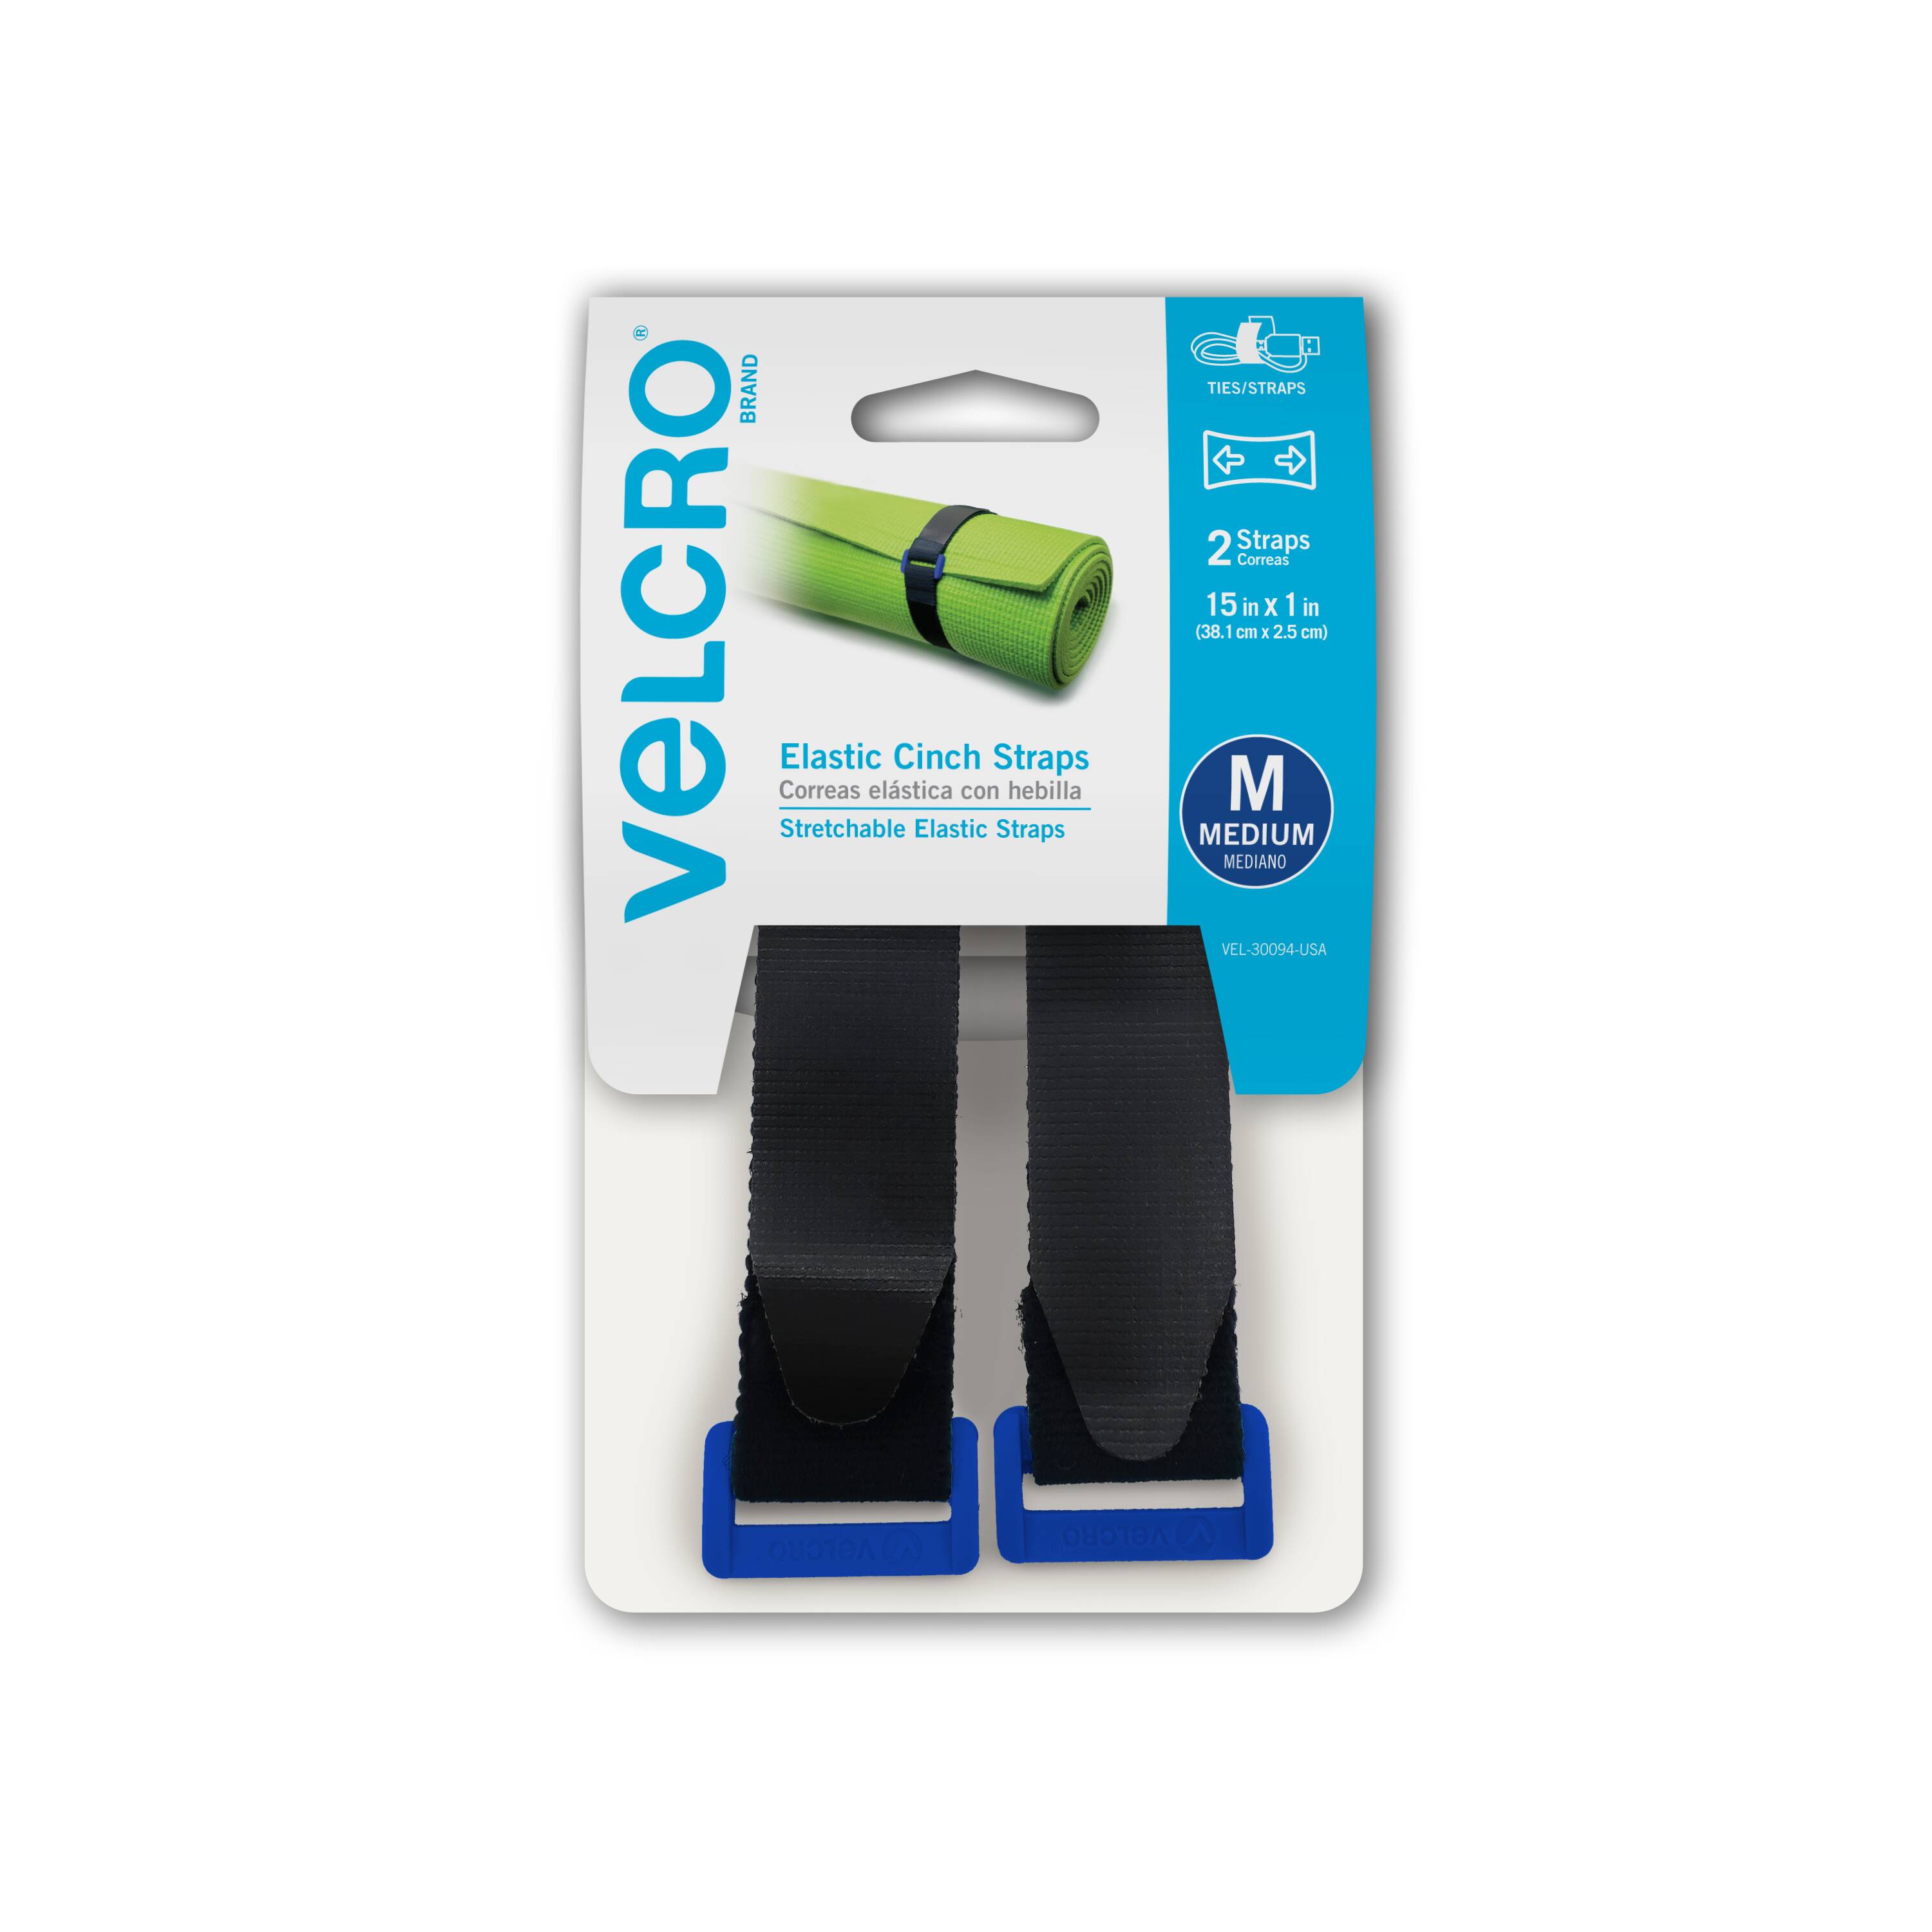 VELCRO 30 in. Cinch Strap VEL-30840-USA - The Home Depot